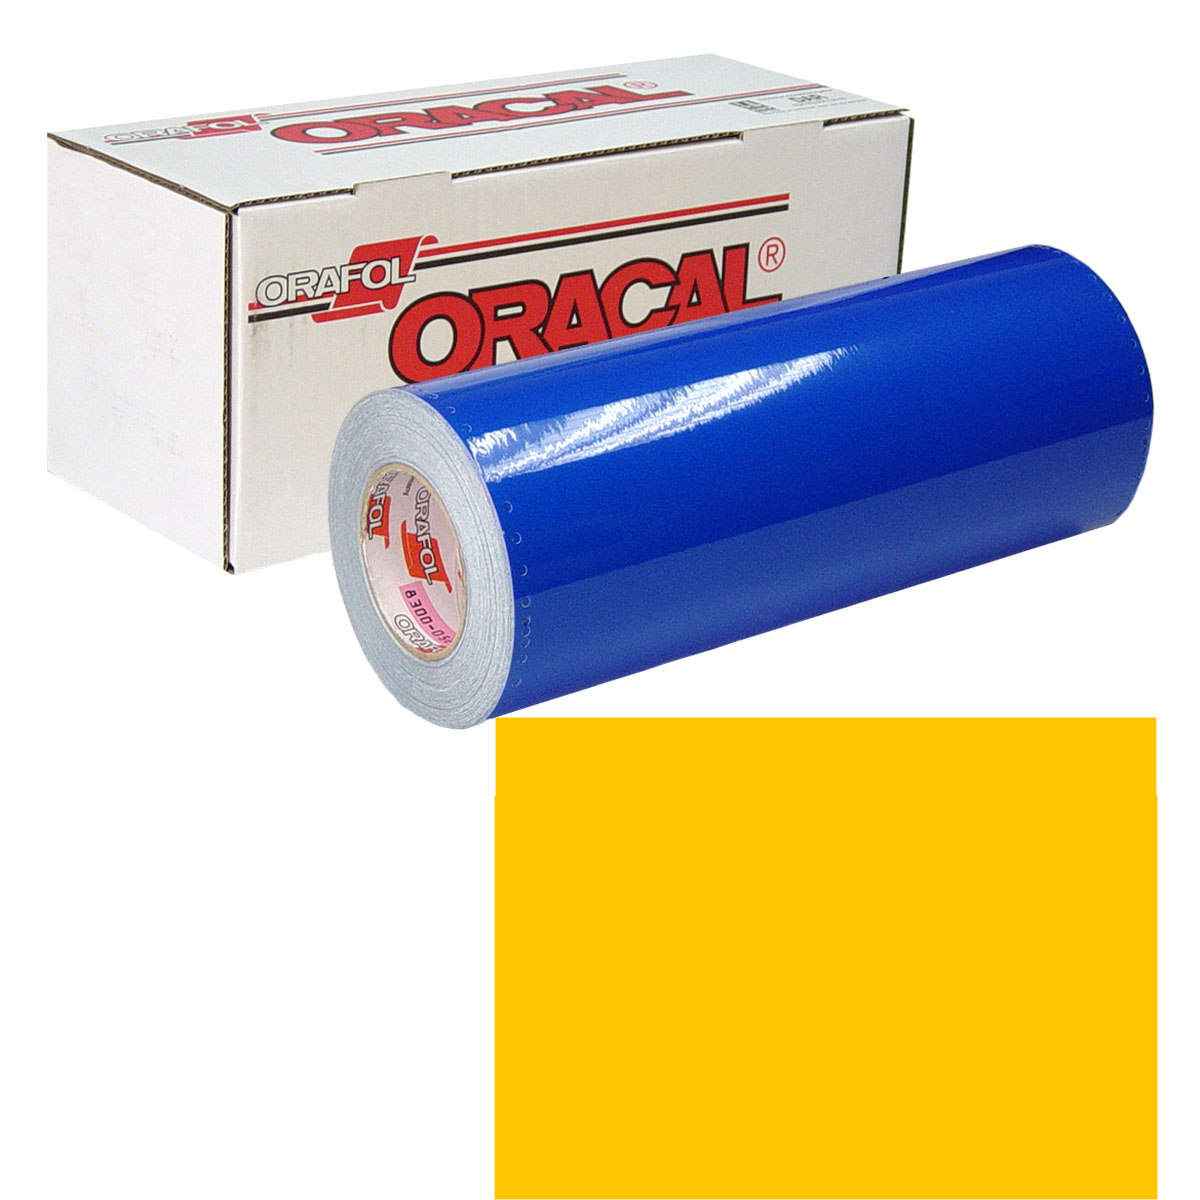 ORACAL 631 15in X 50yd 021 Yellow